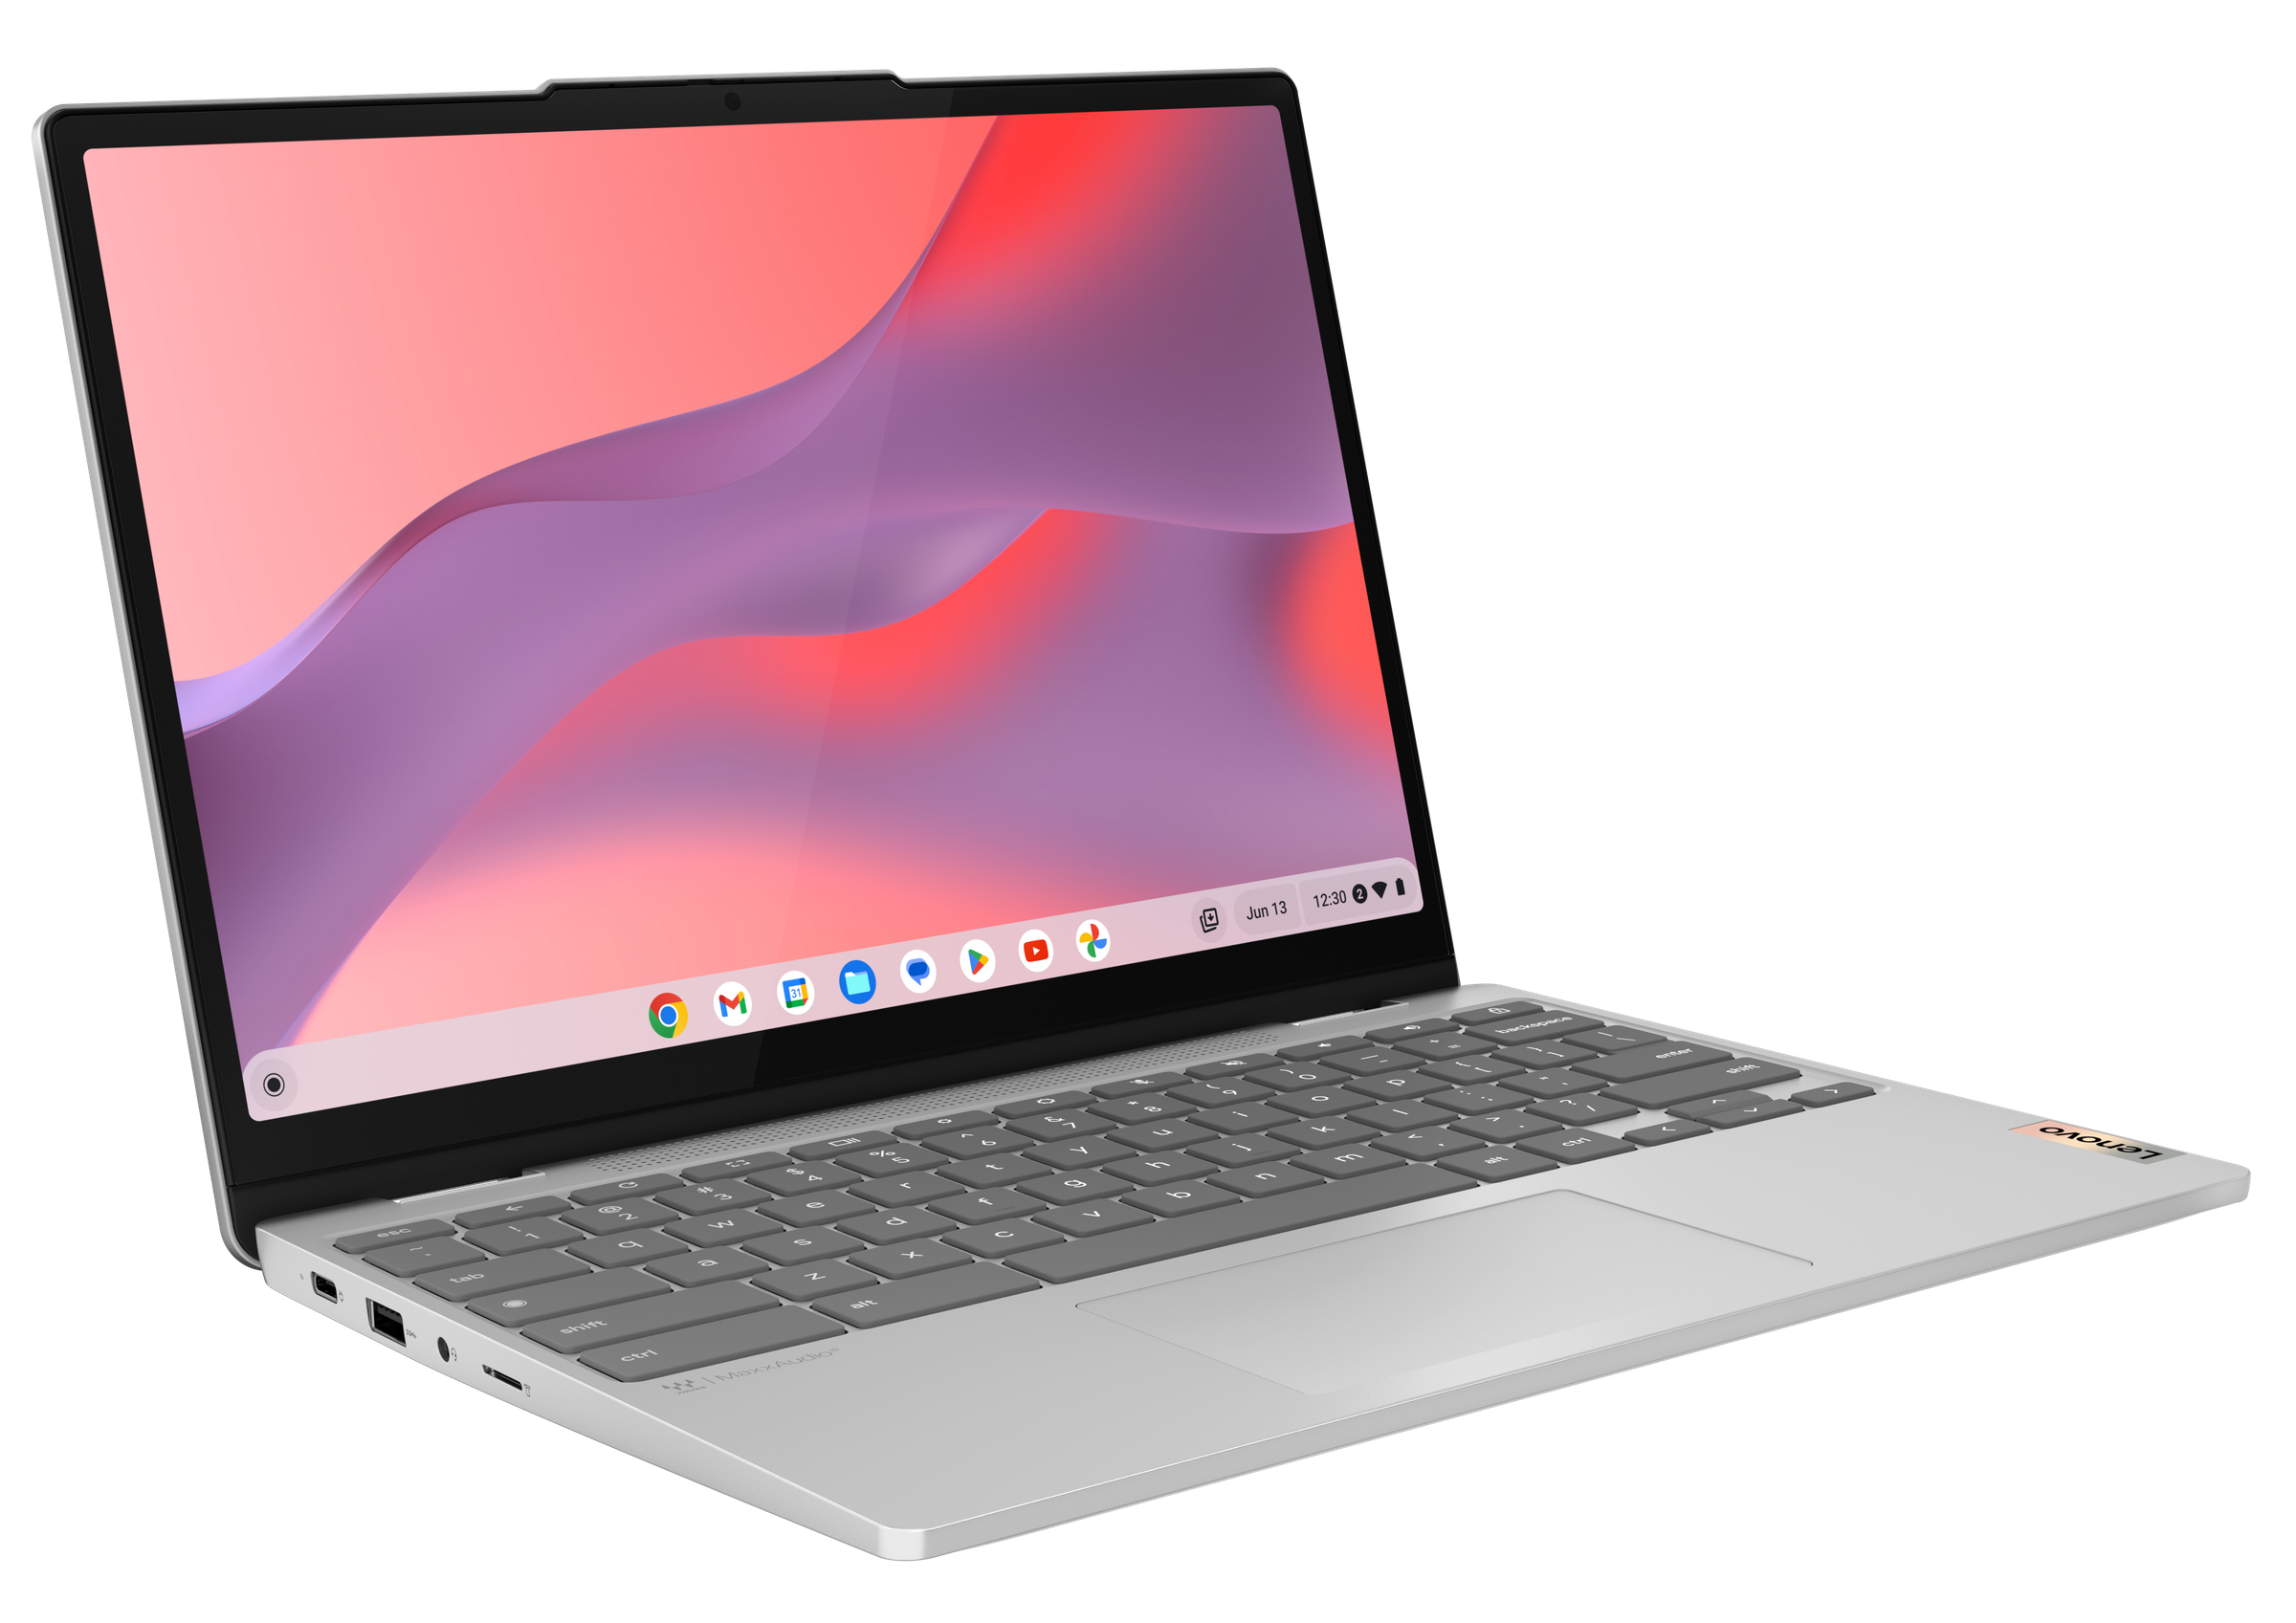 The Lenovo IdeaPad Flex 3i is the CES 2023 gadget I’m most excited for